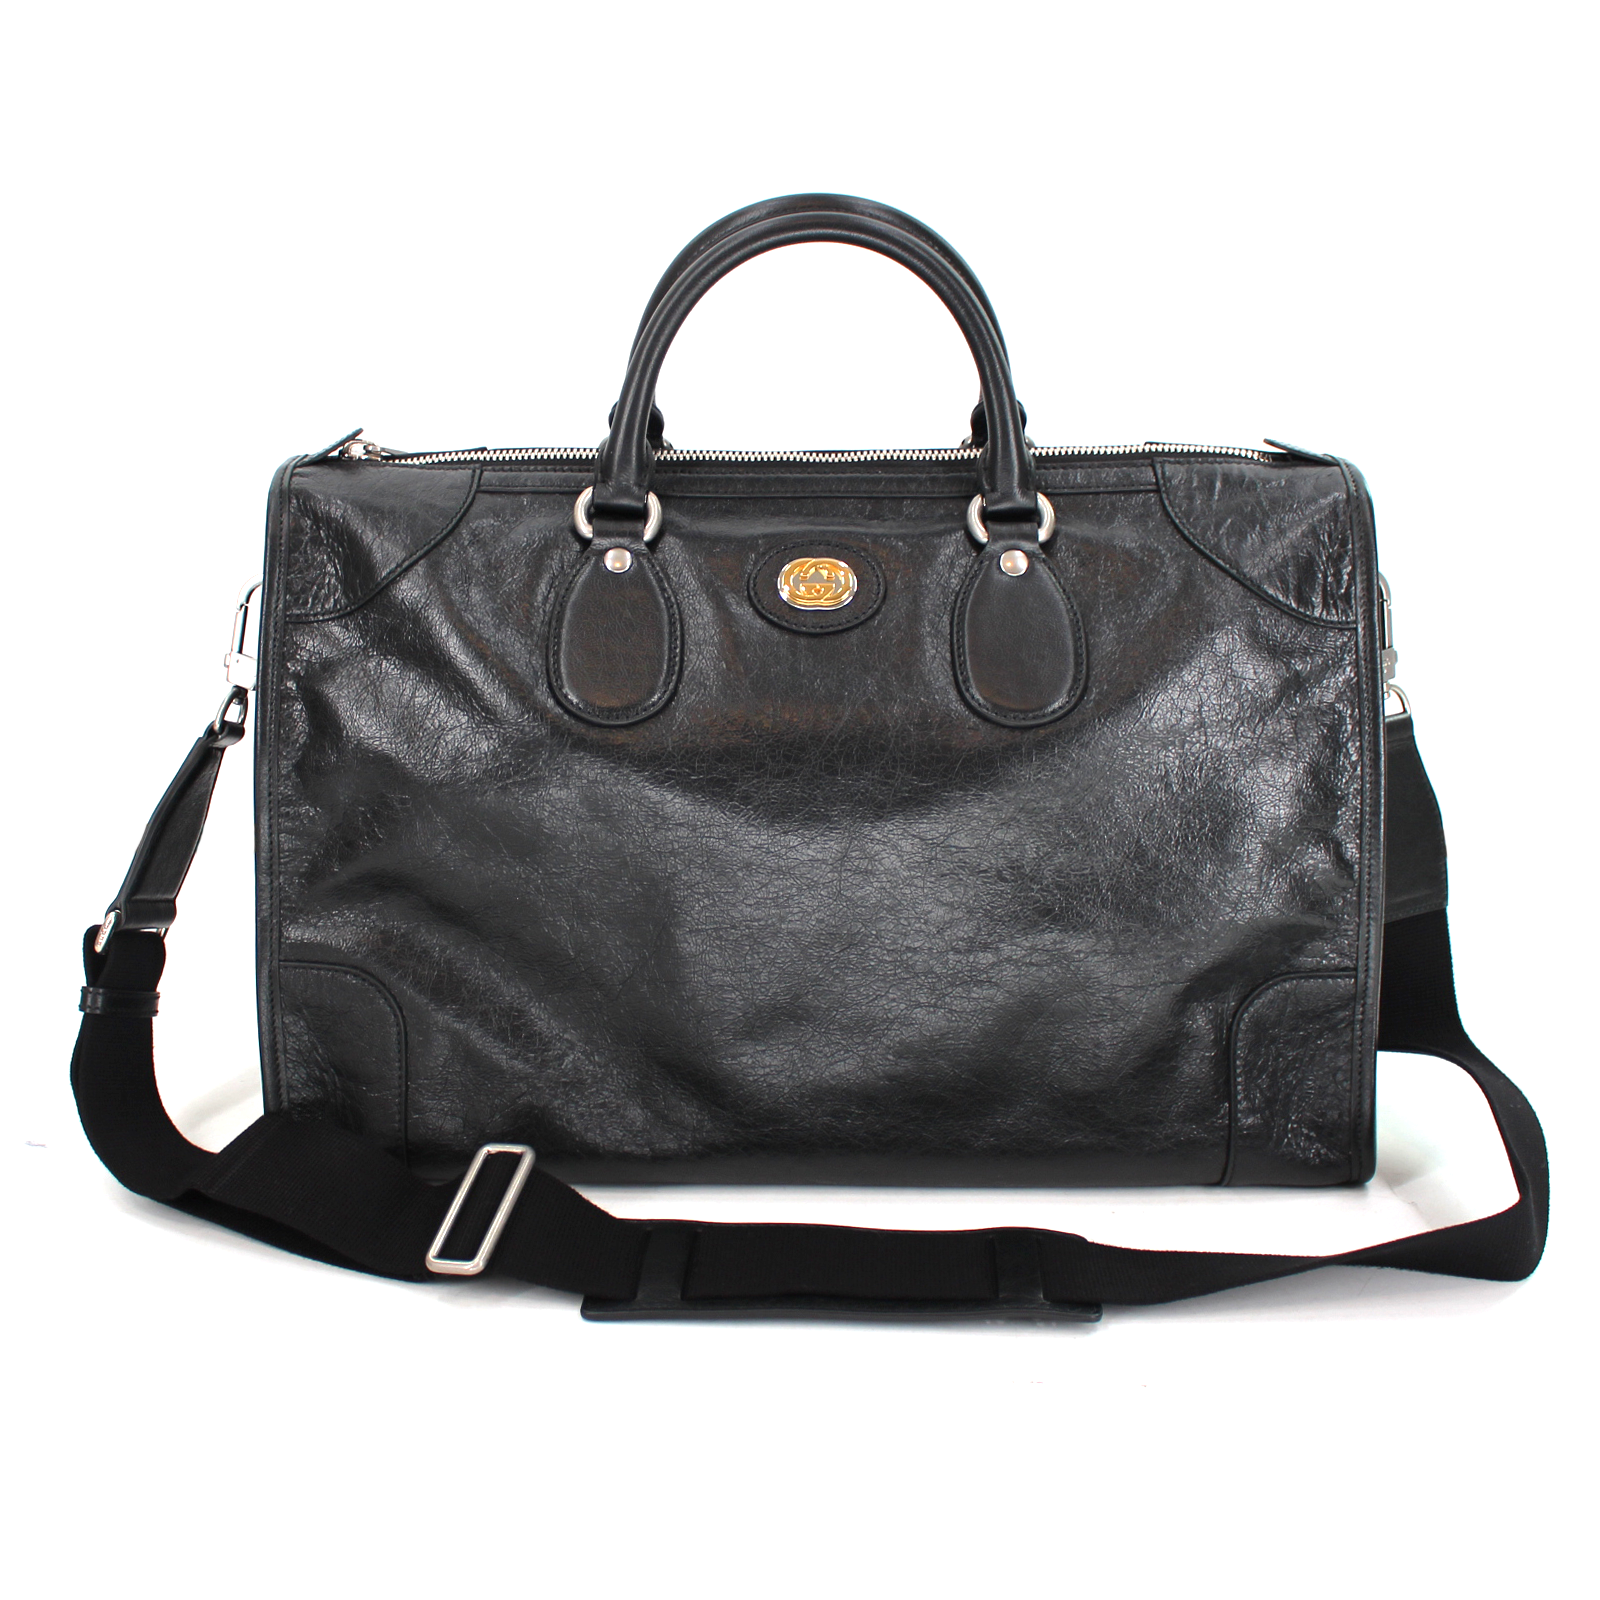 Gucci Black Leather Large Travel Duffle Shoulder Bag – The Closet New York